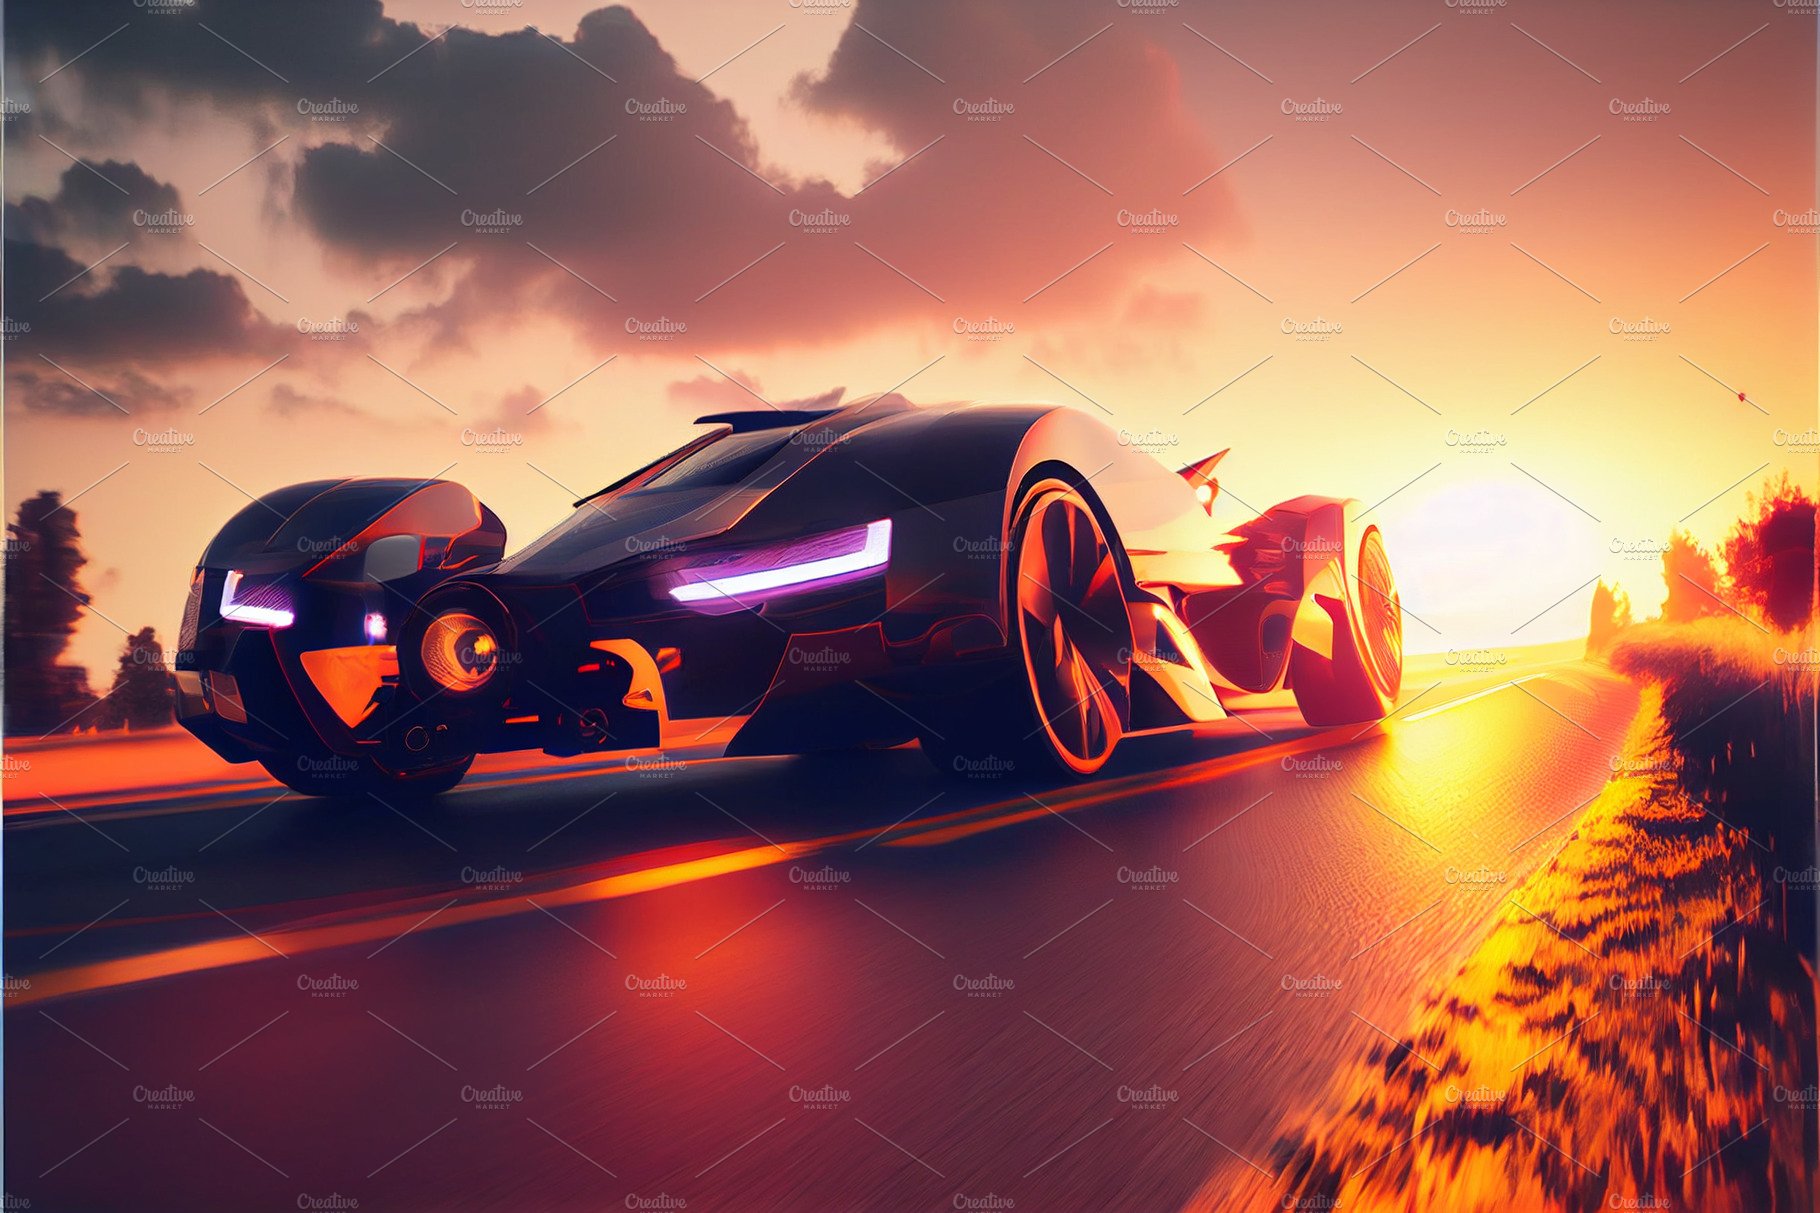 Sport car wheel drifting and smoking on blurred background cover image.